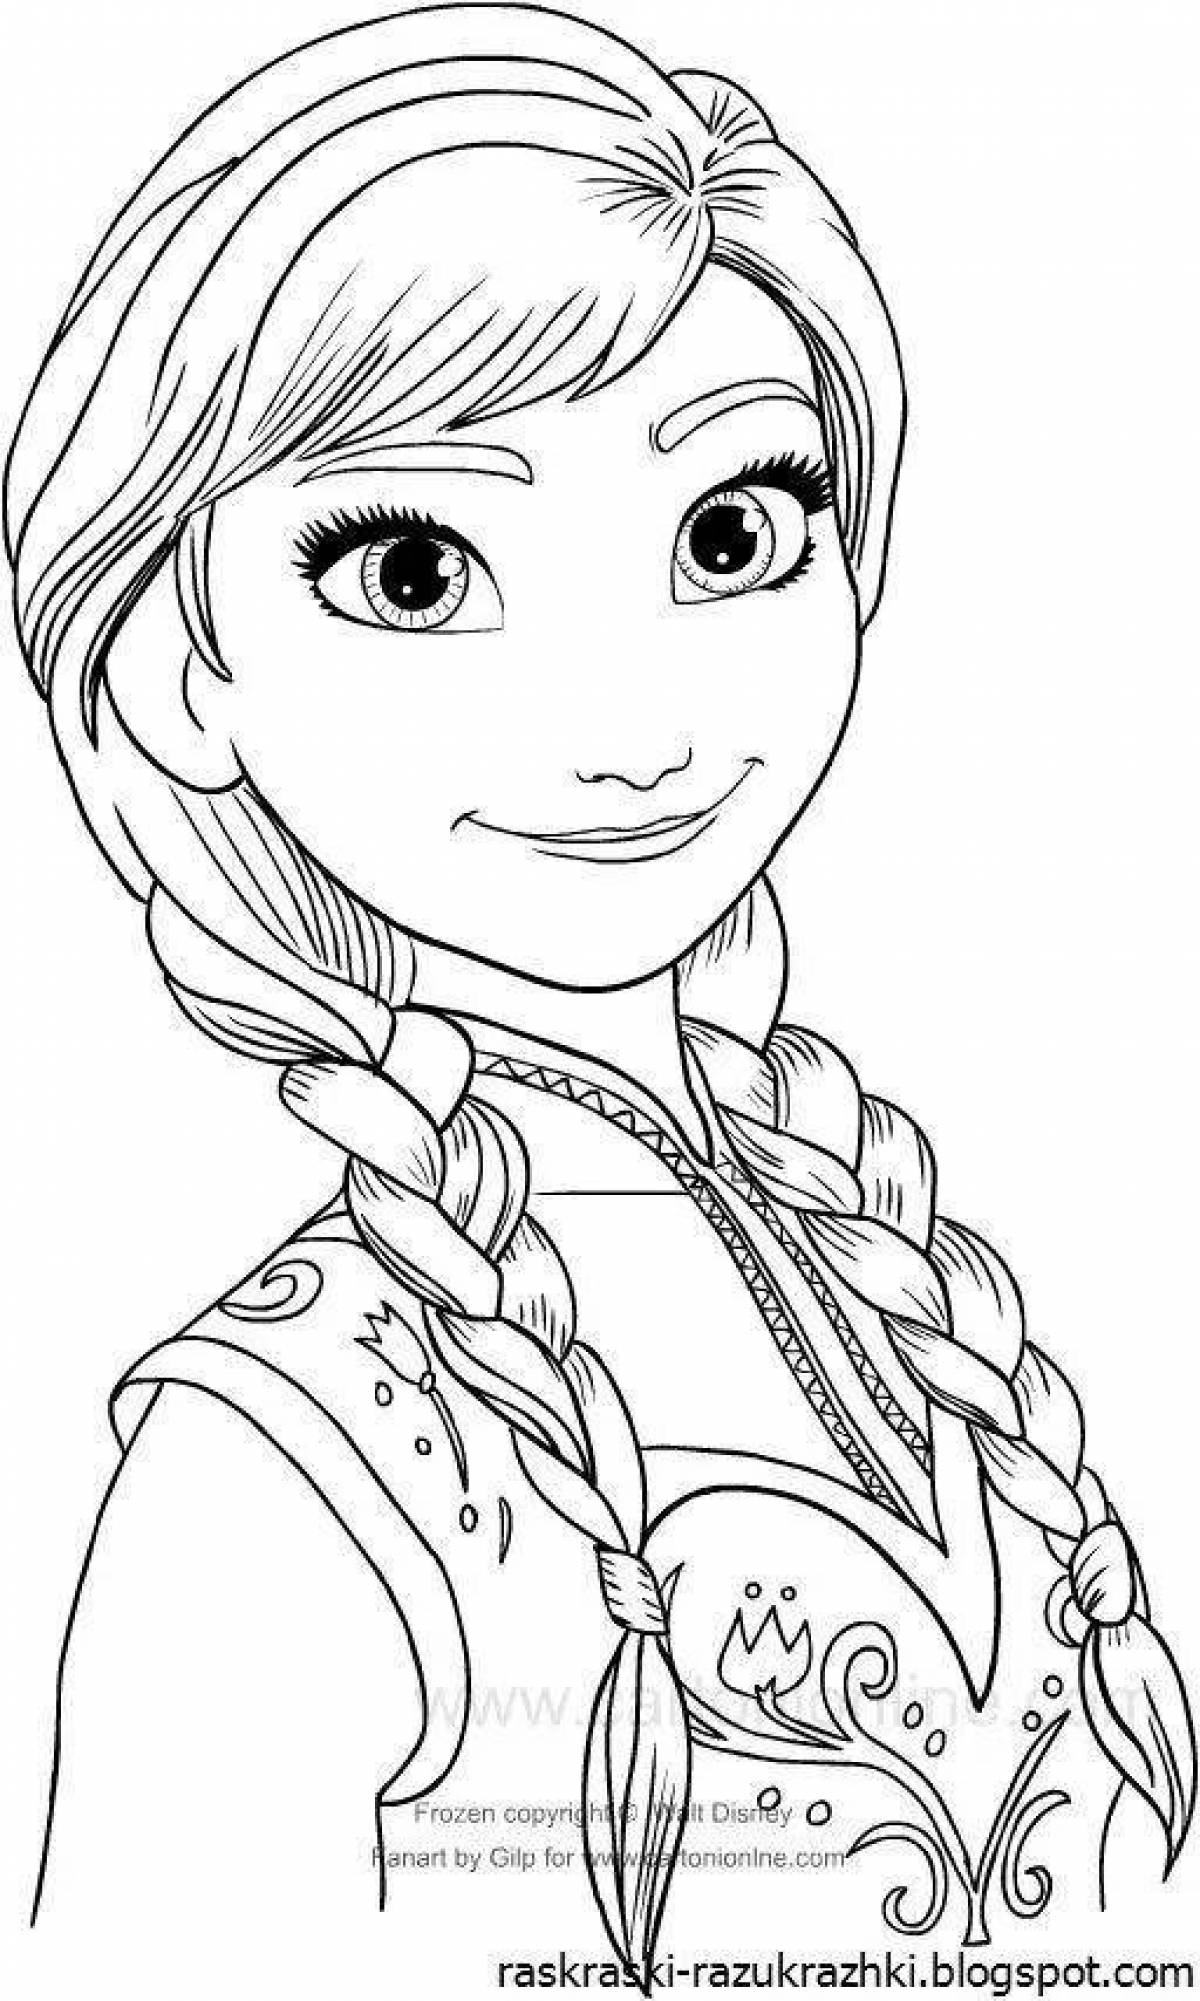 Lovely princess anna coloring page